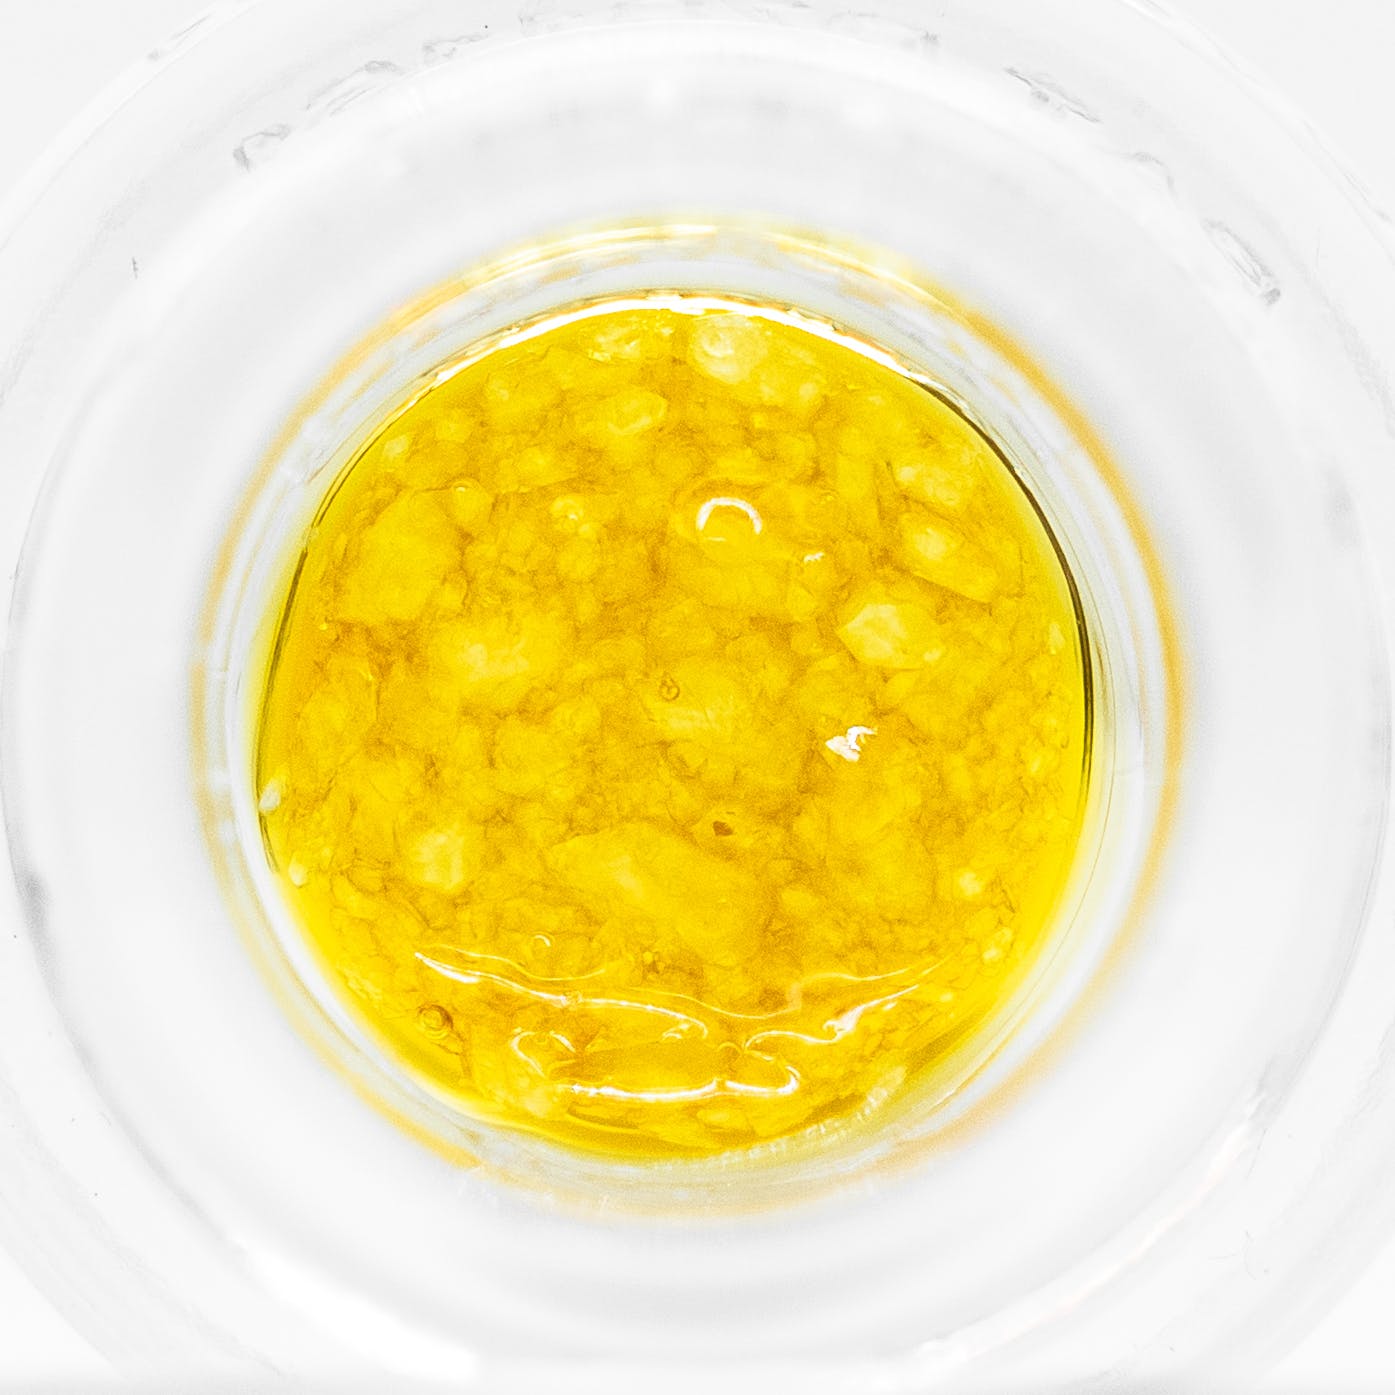 concentrate-2440-csc-mellow-medicine-live-resin-sh-87-56-25-buy-one-2c-get-one-50-25-off